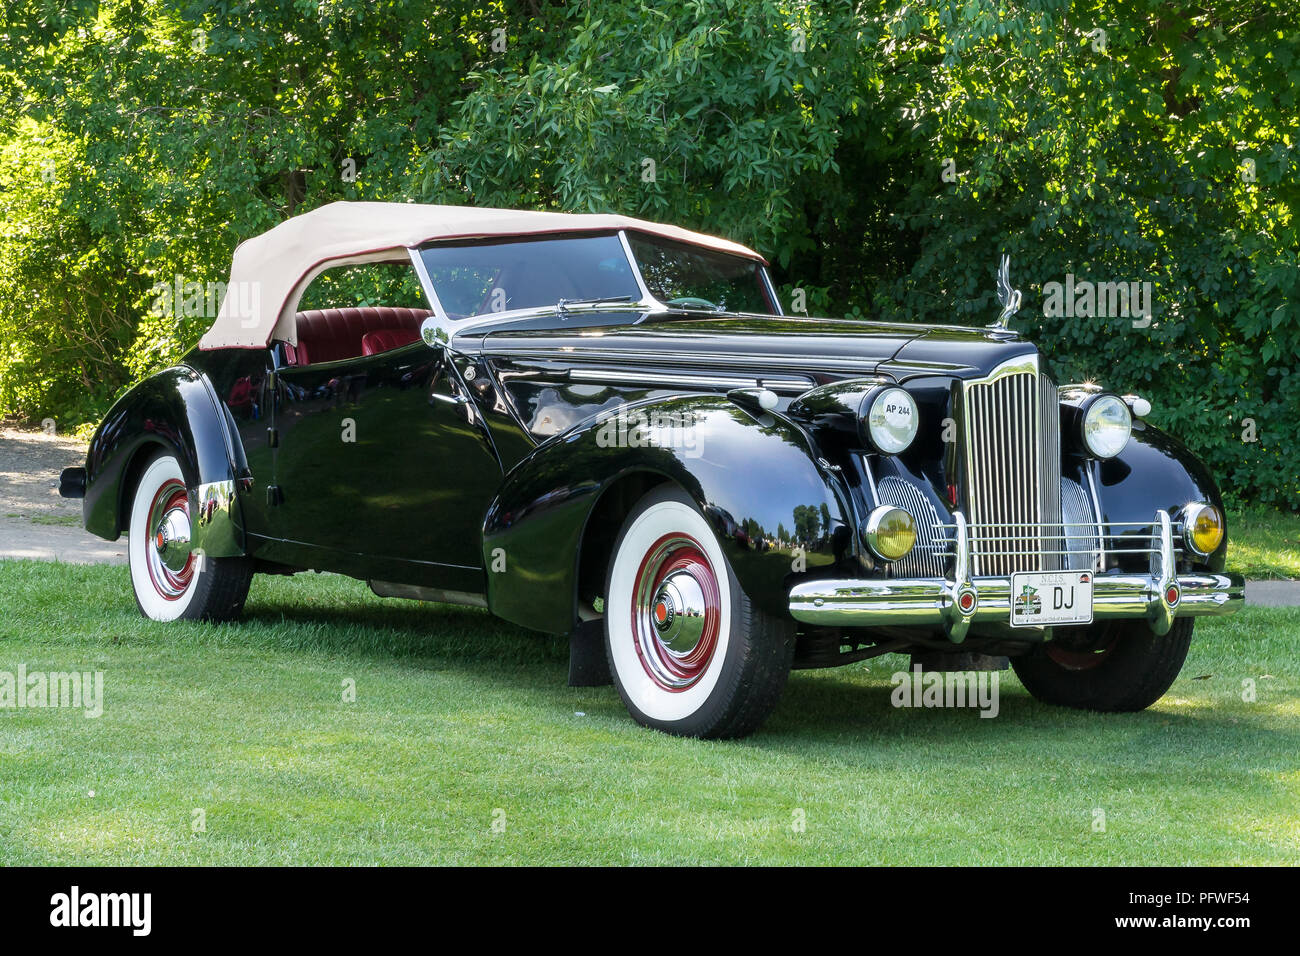 PLYMOUTH, MI/USA - JULY 29, 2018: A 1938 Packard car on display at the  Concours d'Elegance of America car show at the The Inn at St. John's Stock  Photo - Alamy